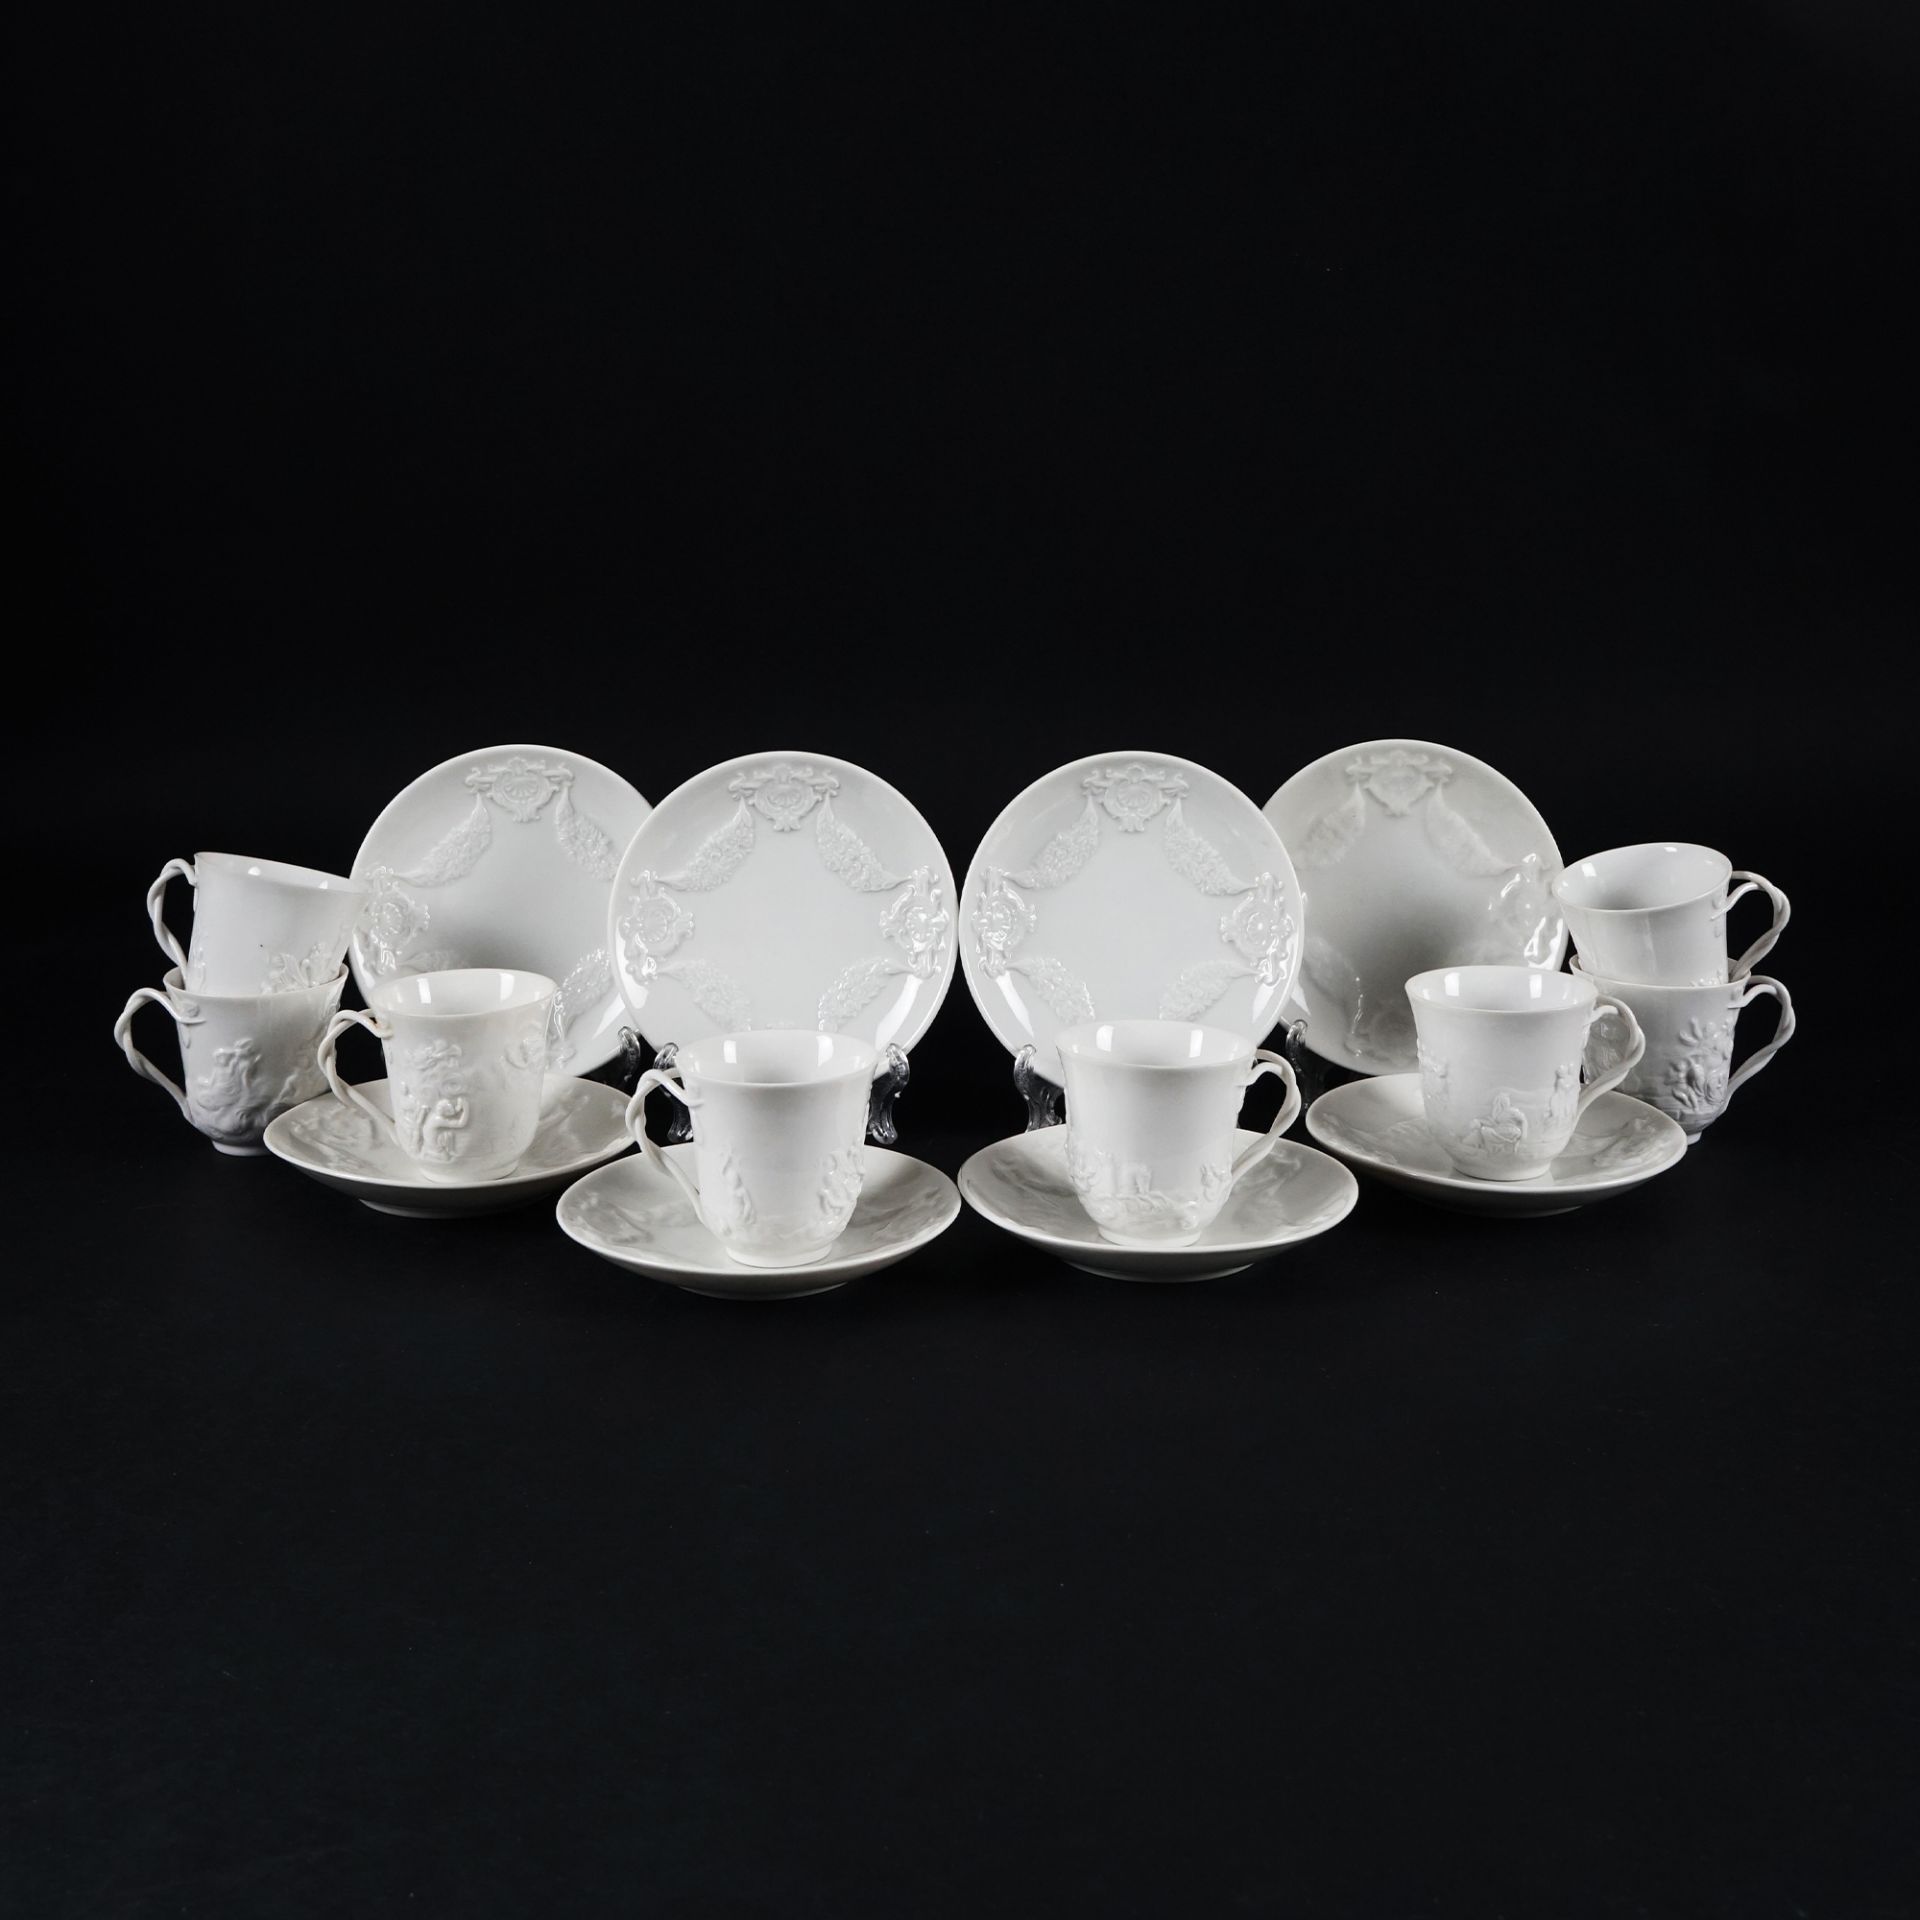 3 white porcelain coffee cups and saucer